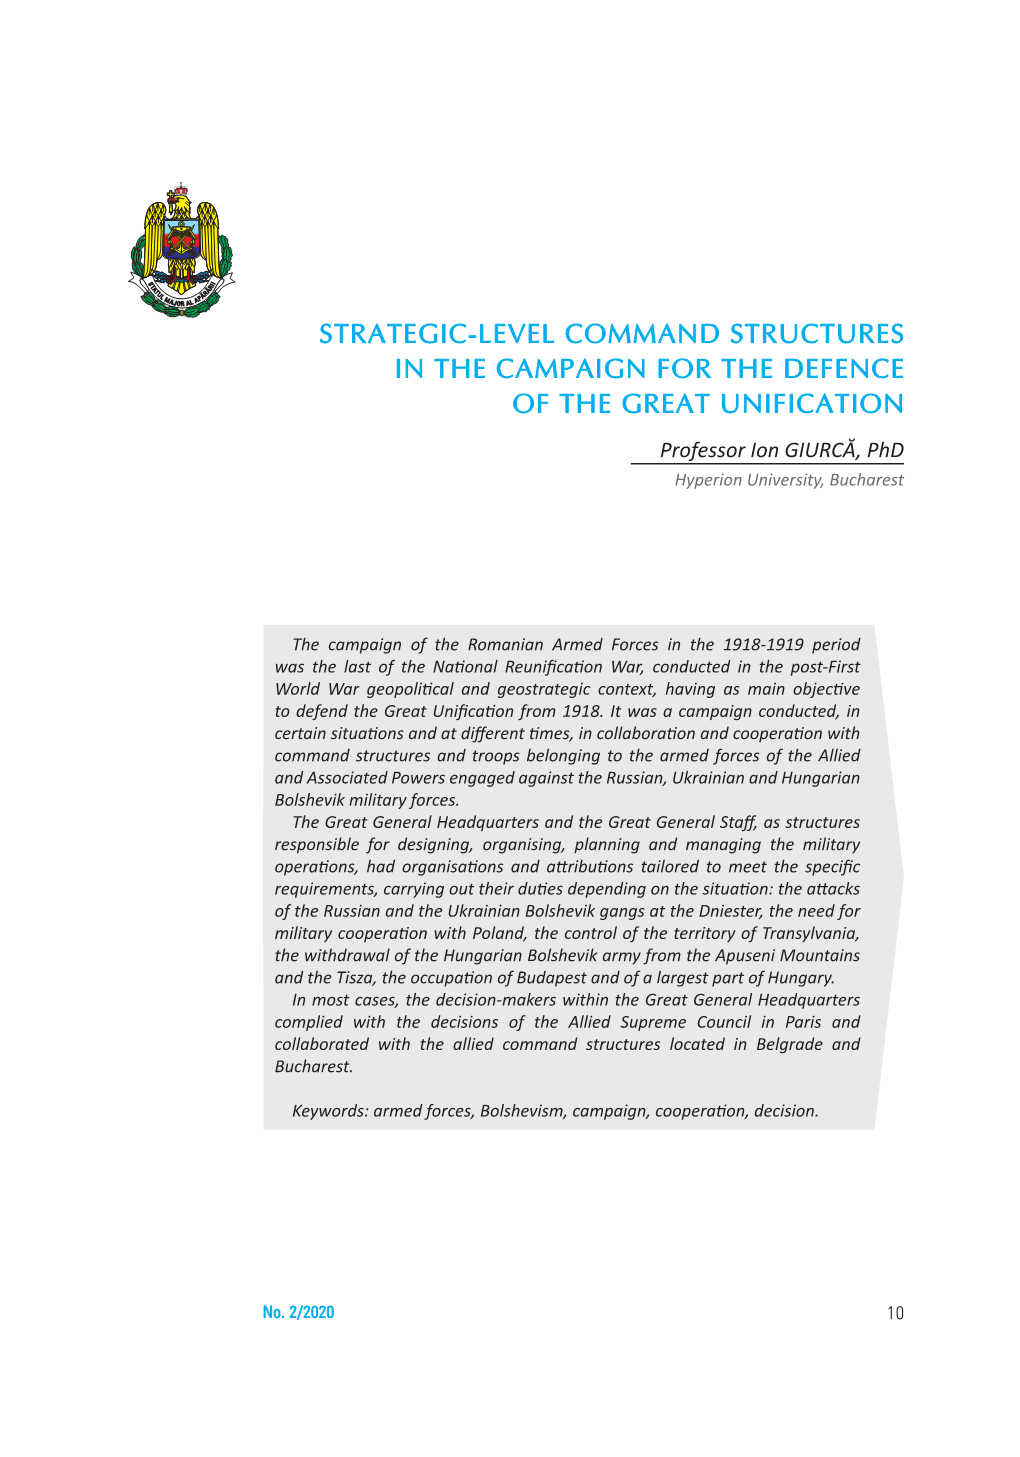 STRATEGIC-LEVEL COMMAND STRUCTURES in the CAMPAIGN for the DEFENCE of the GREAT UNIFICATION Professor Ion GIURCĂ, Phd Hyperion University, Bucharest